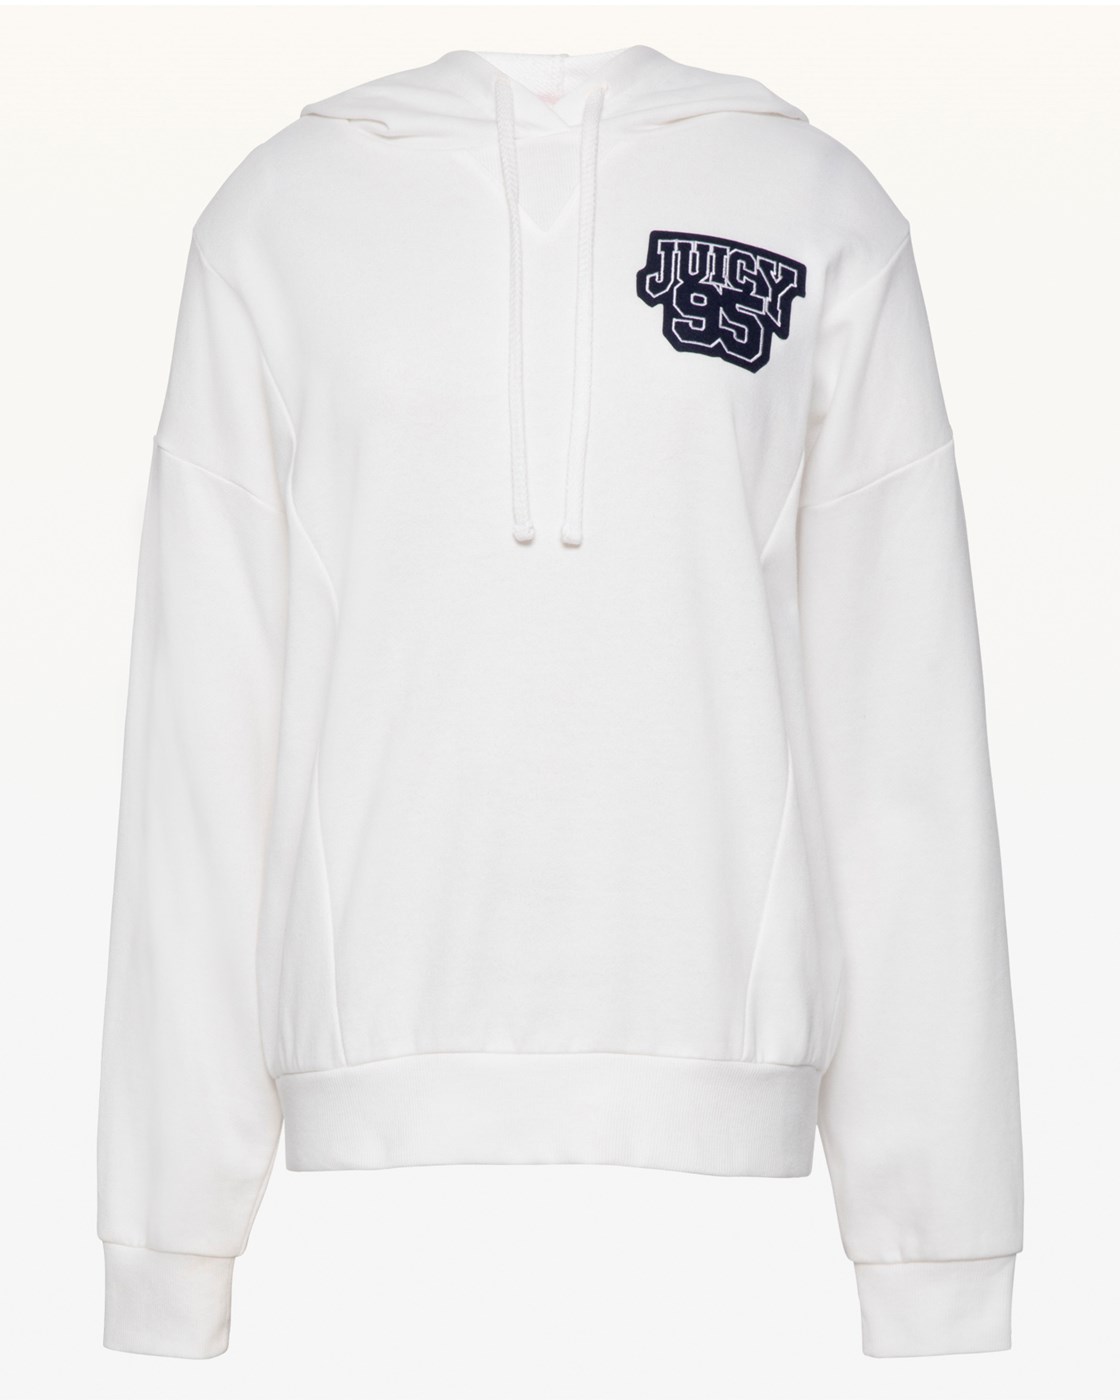 Juicy Couture JXJC Collegiate 95 Hooded Pullover